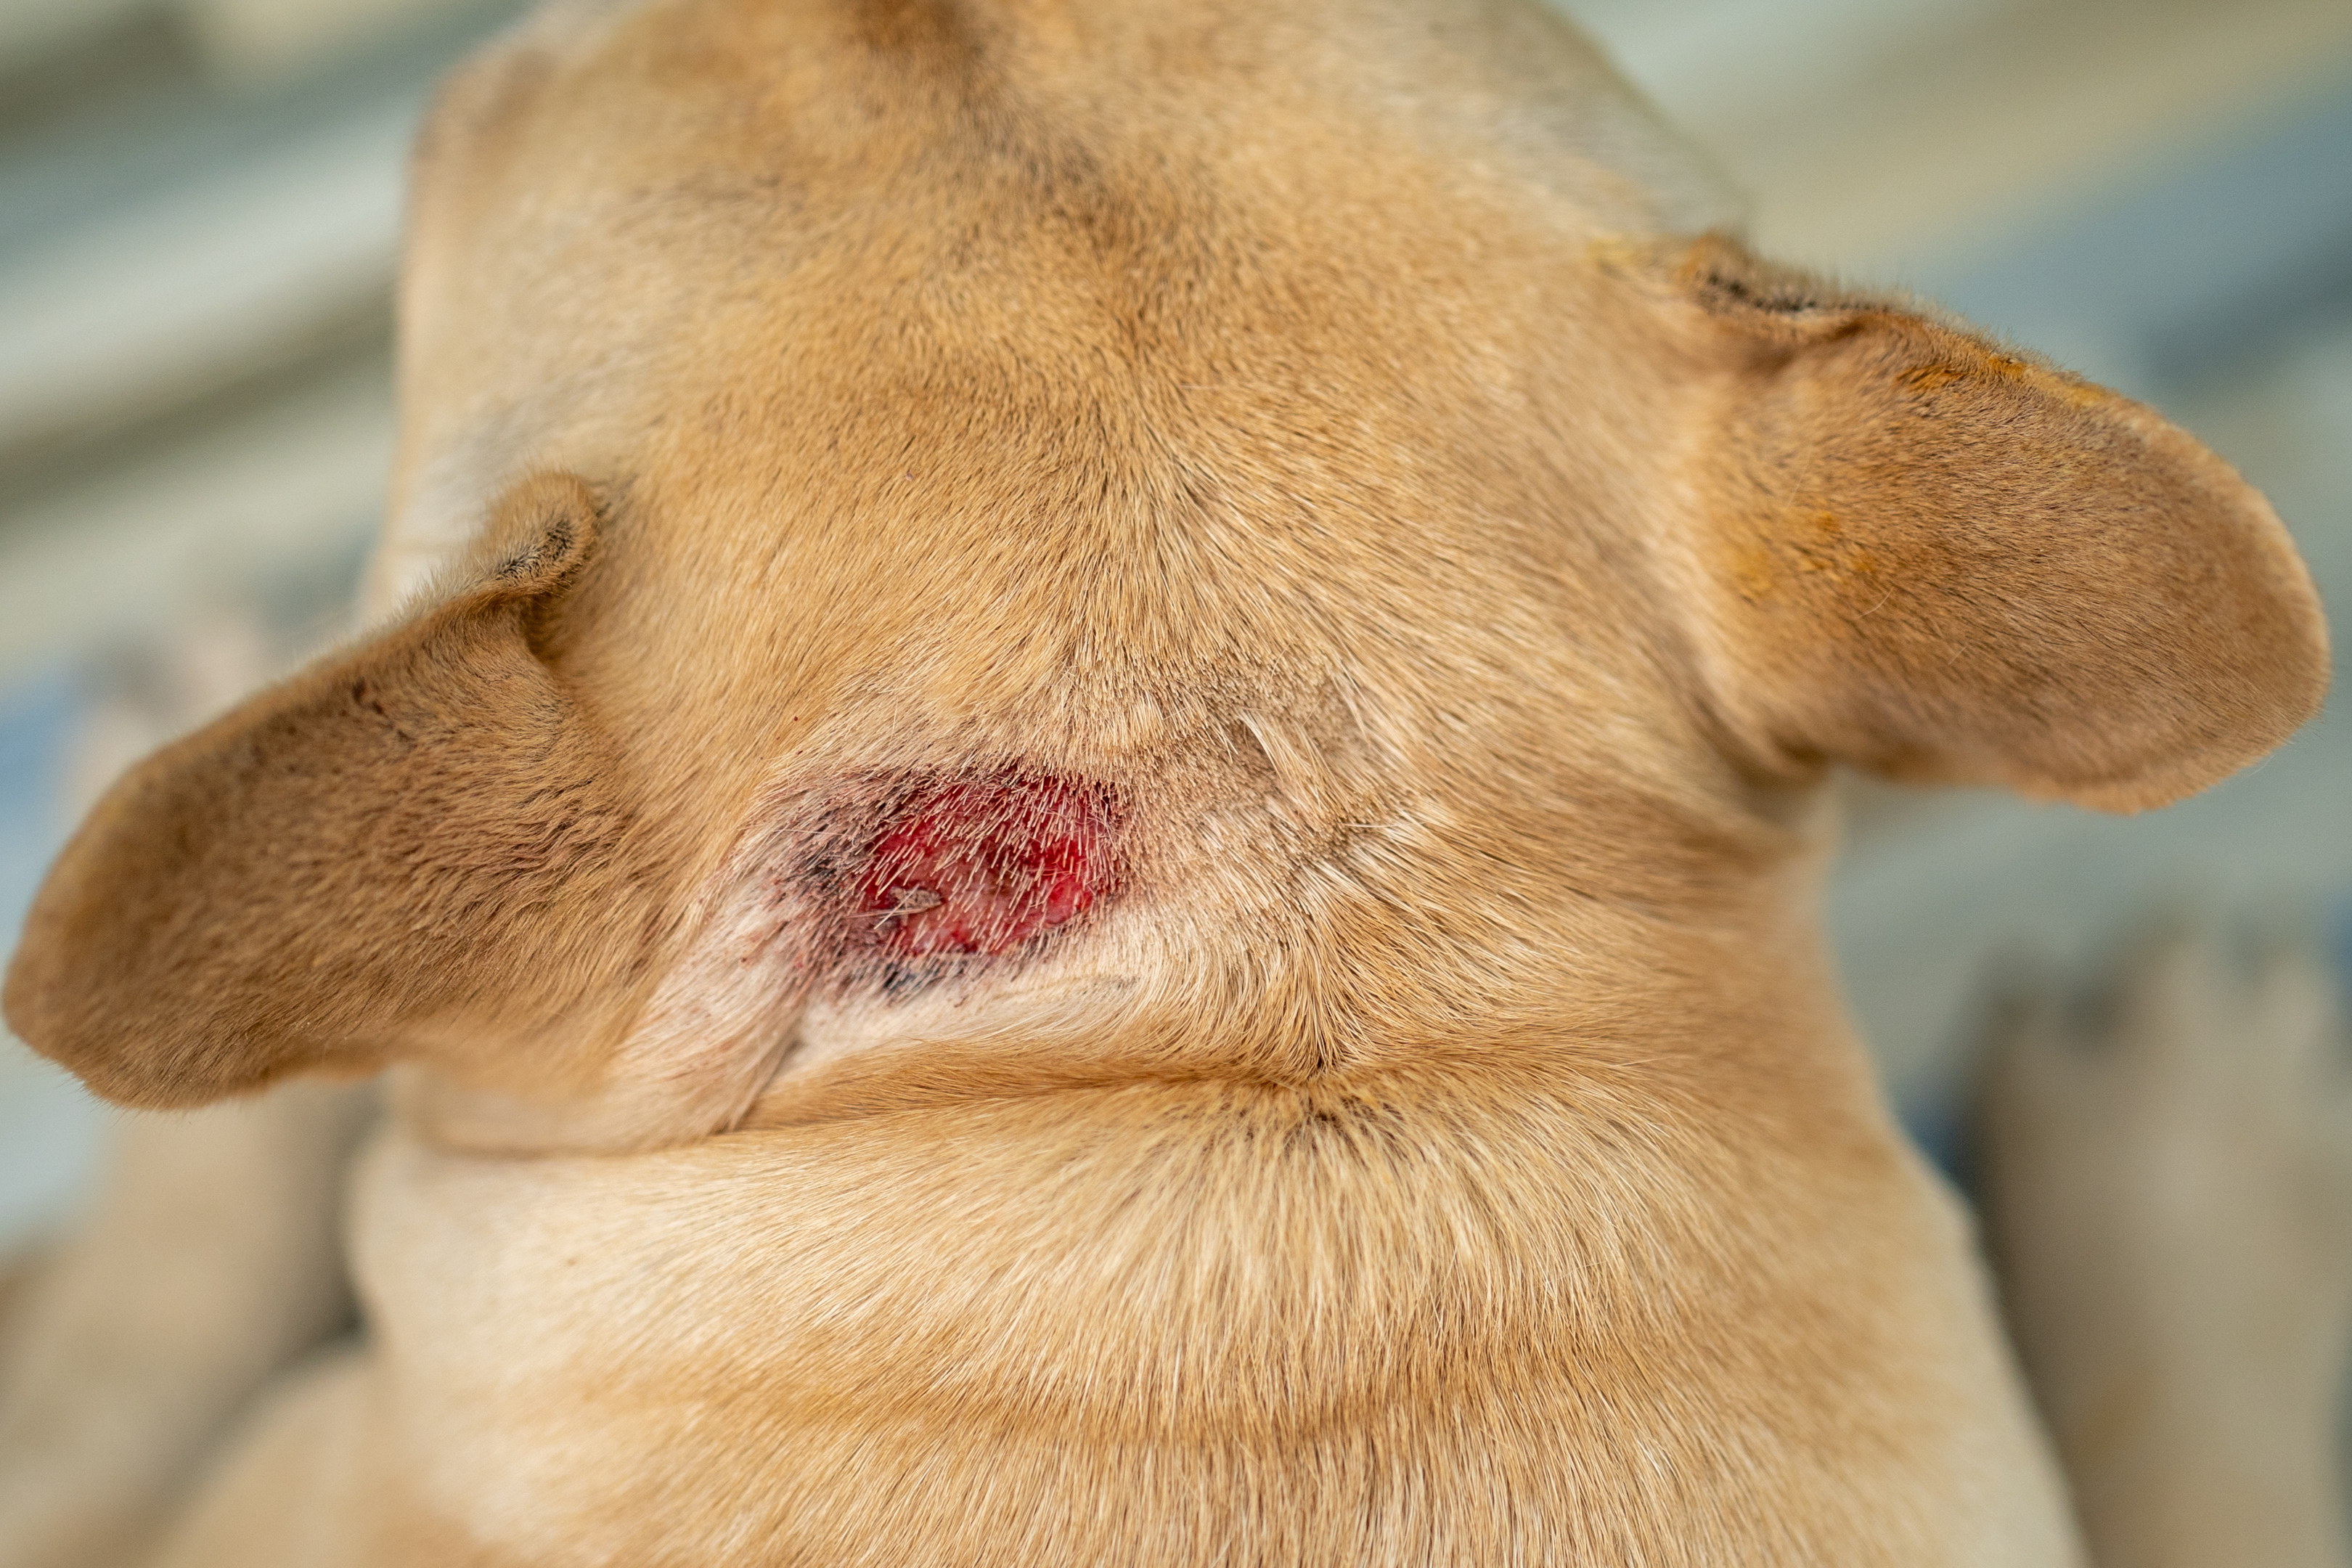 A Close-Up Of A Dog'S Skin With Hot Spots